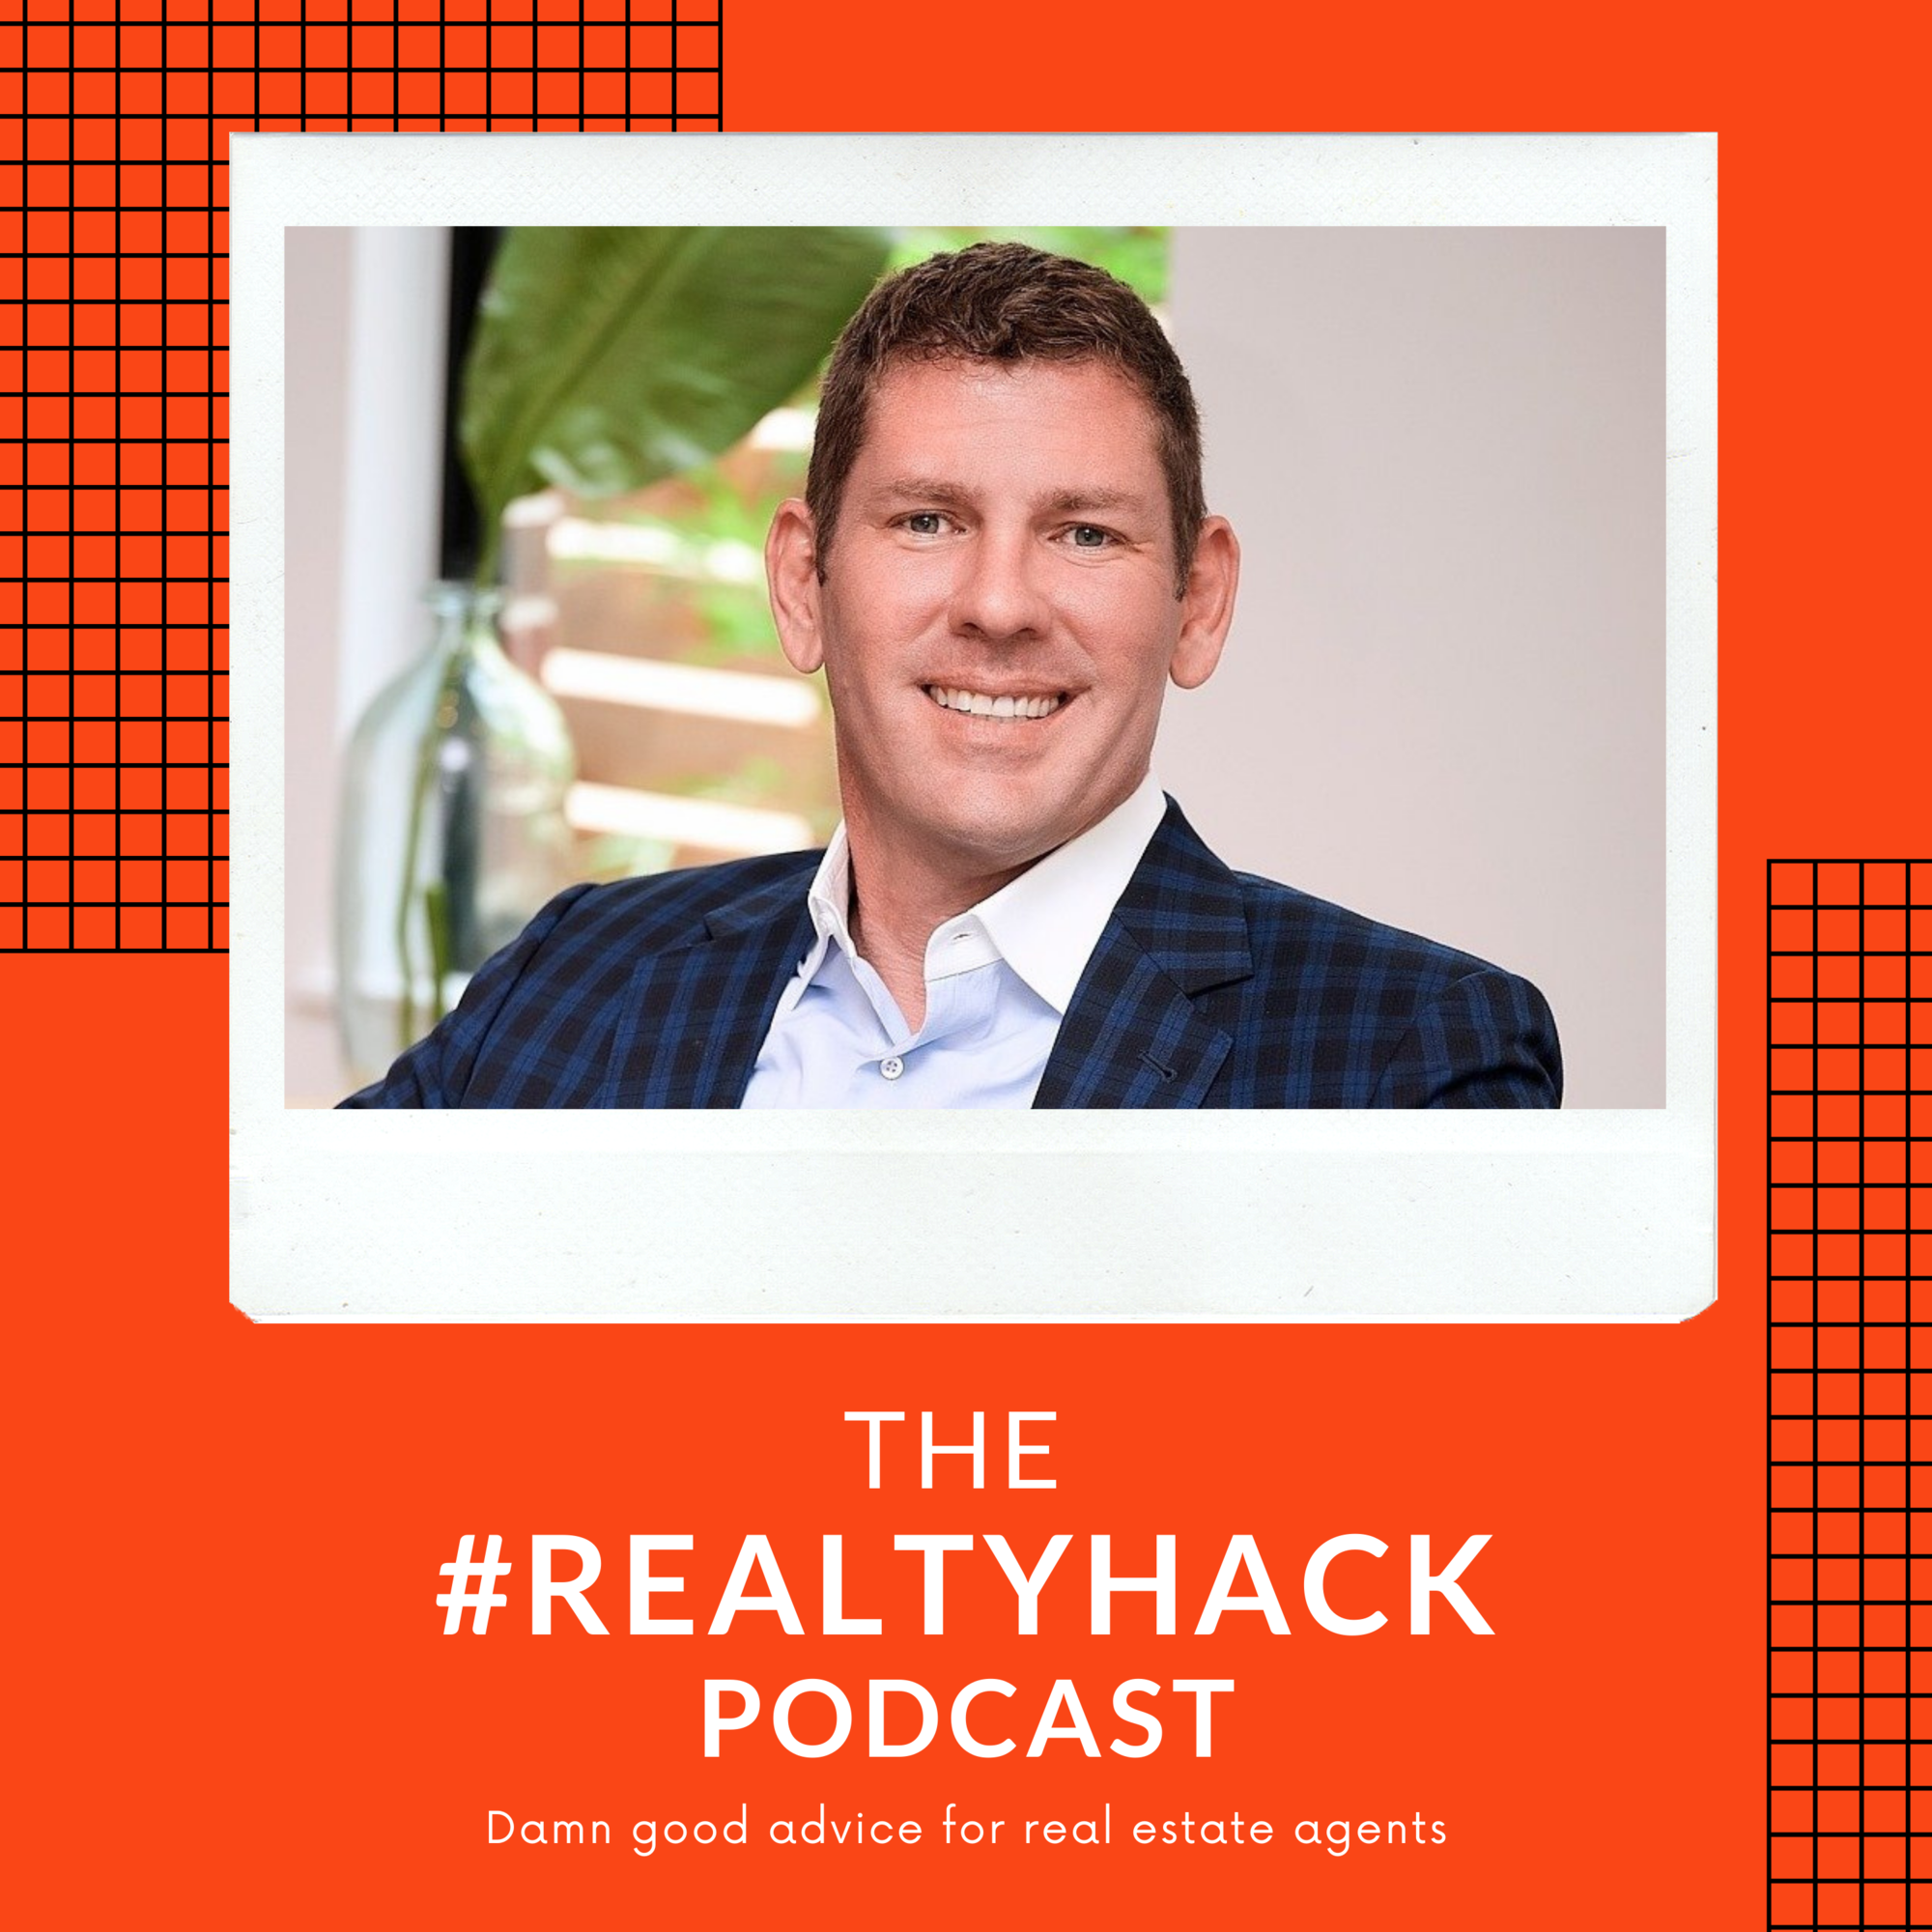 Passive Real Estate Investing on Apple Podcasts